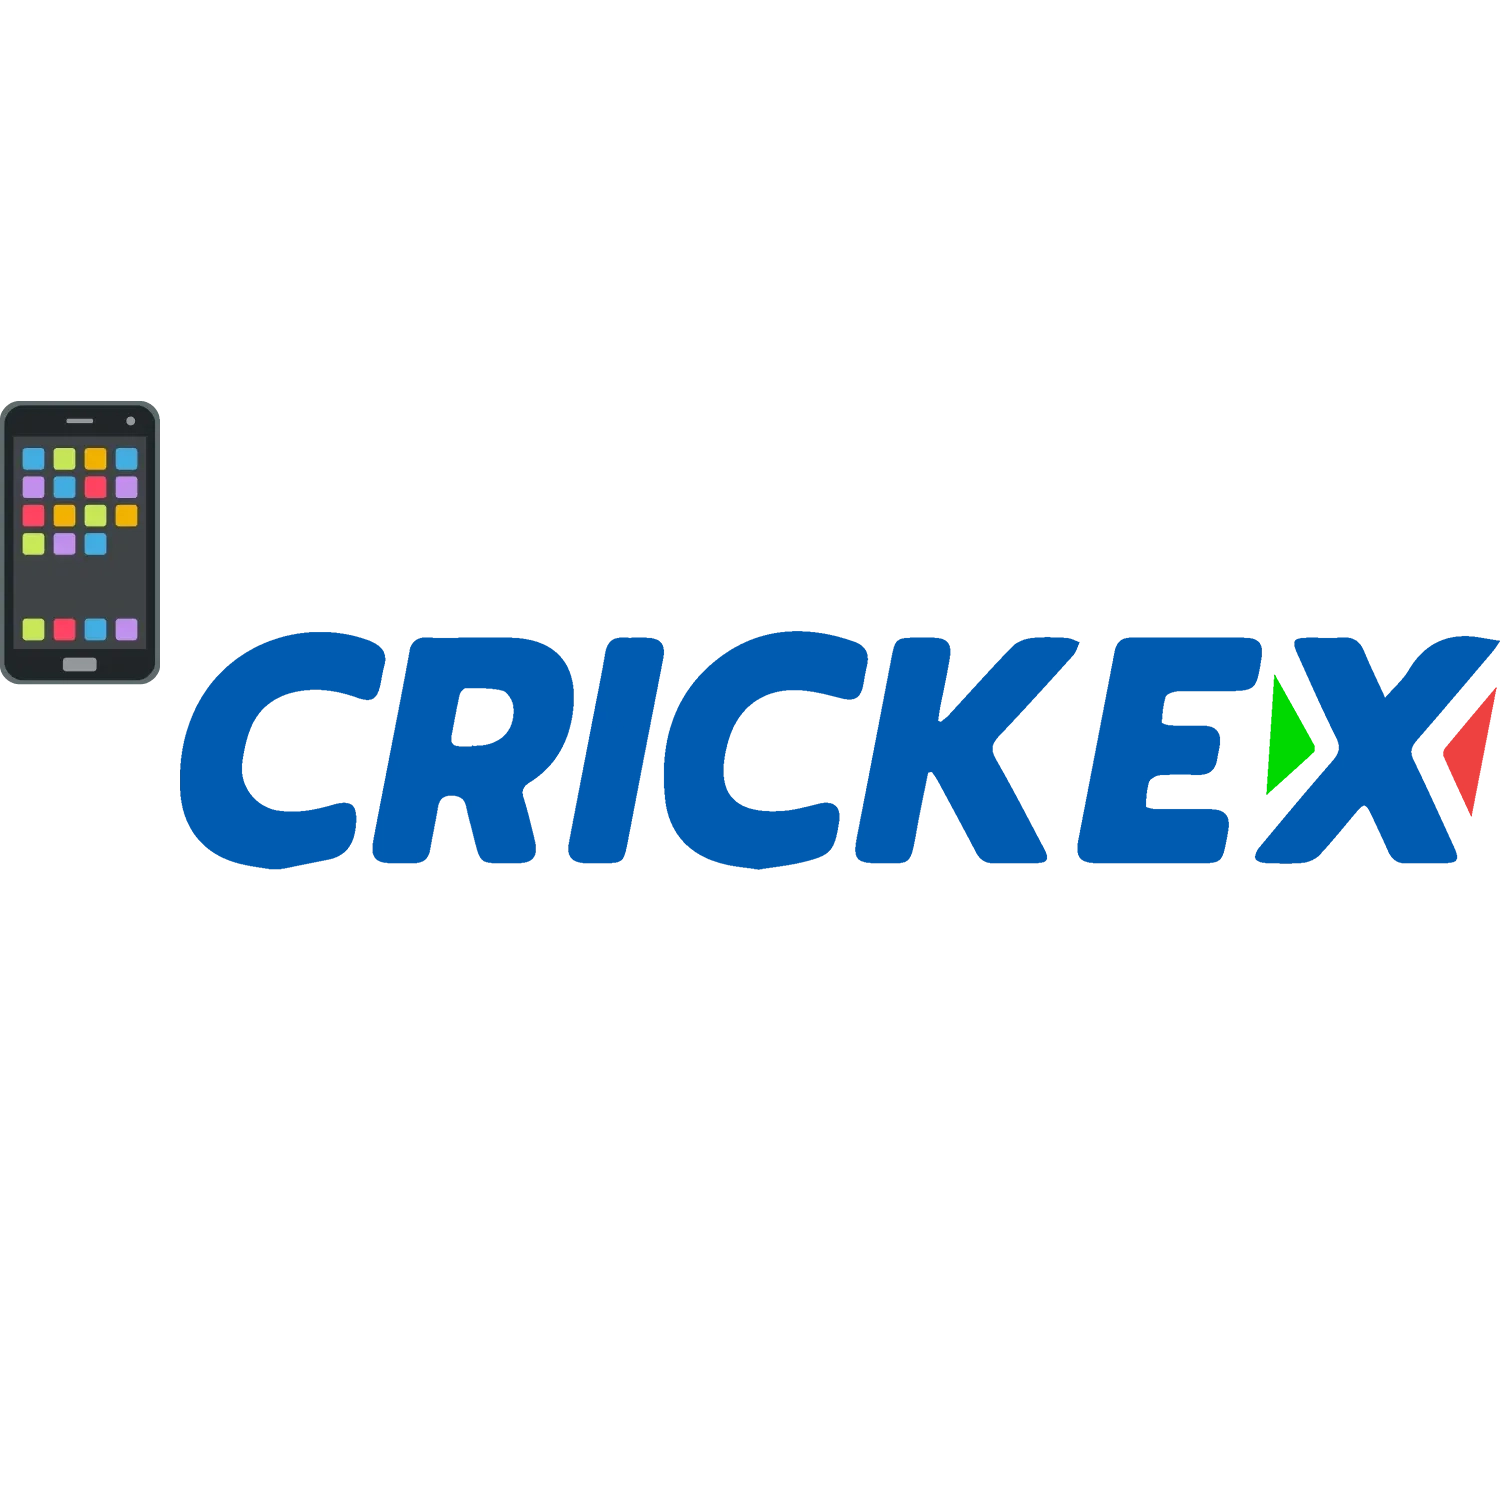 Try the Crickex app, you will be surprised by the stability and performance.